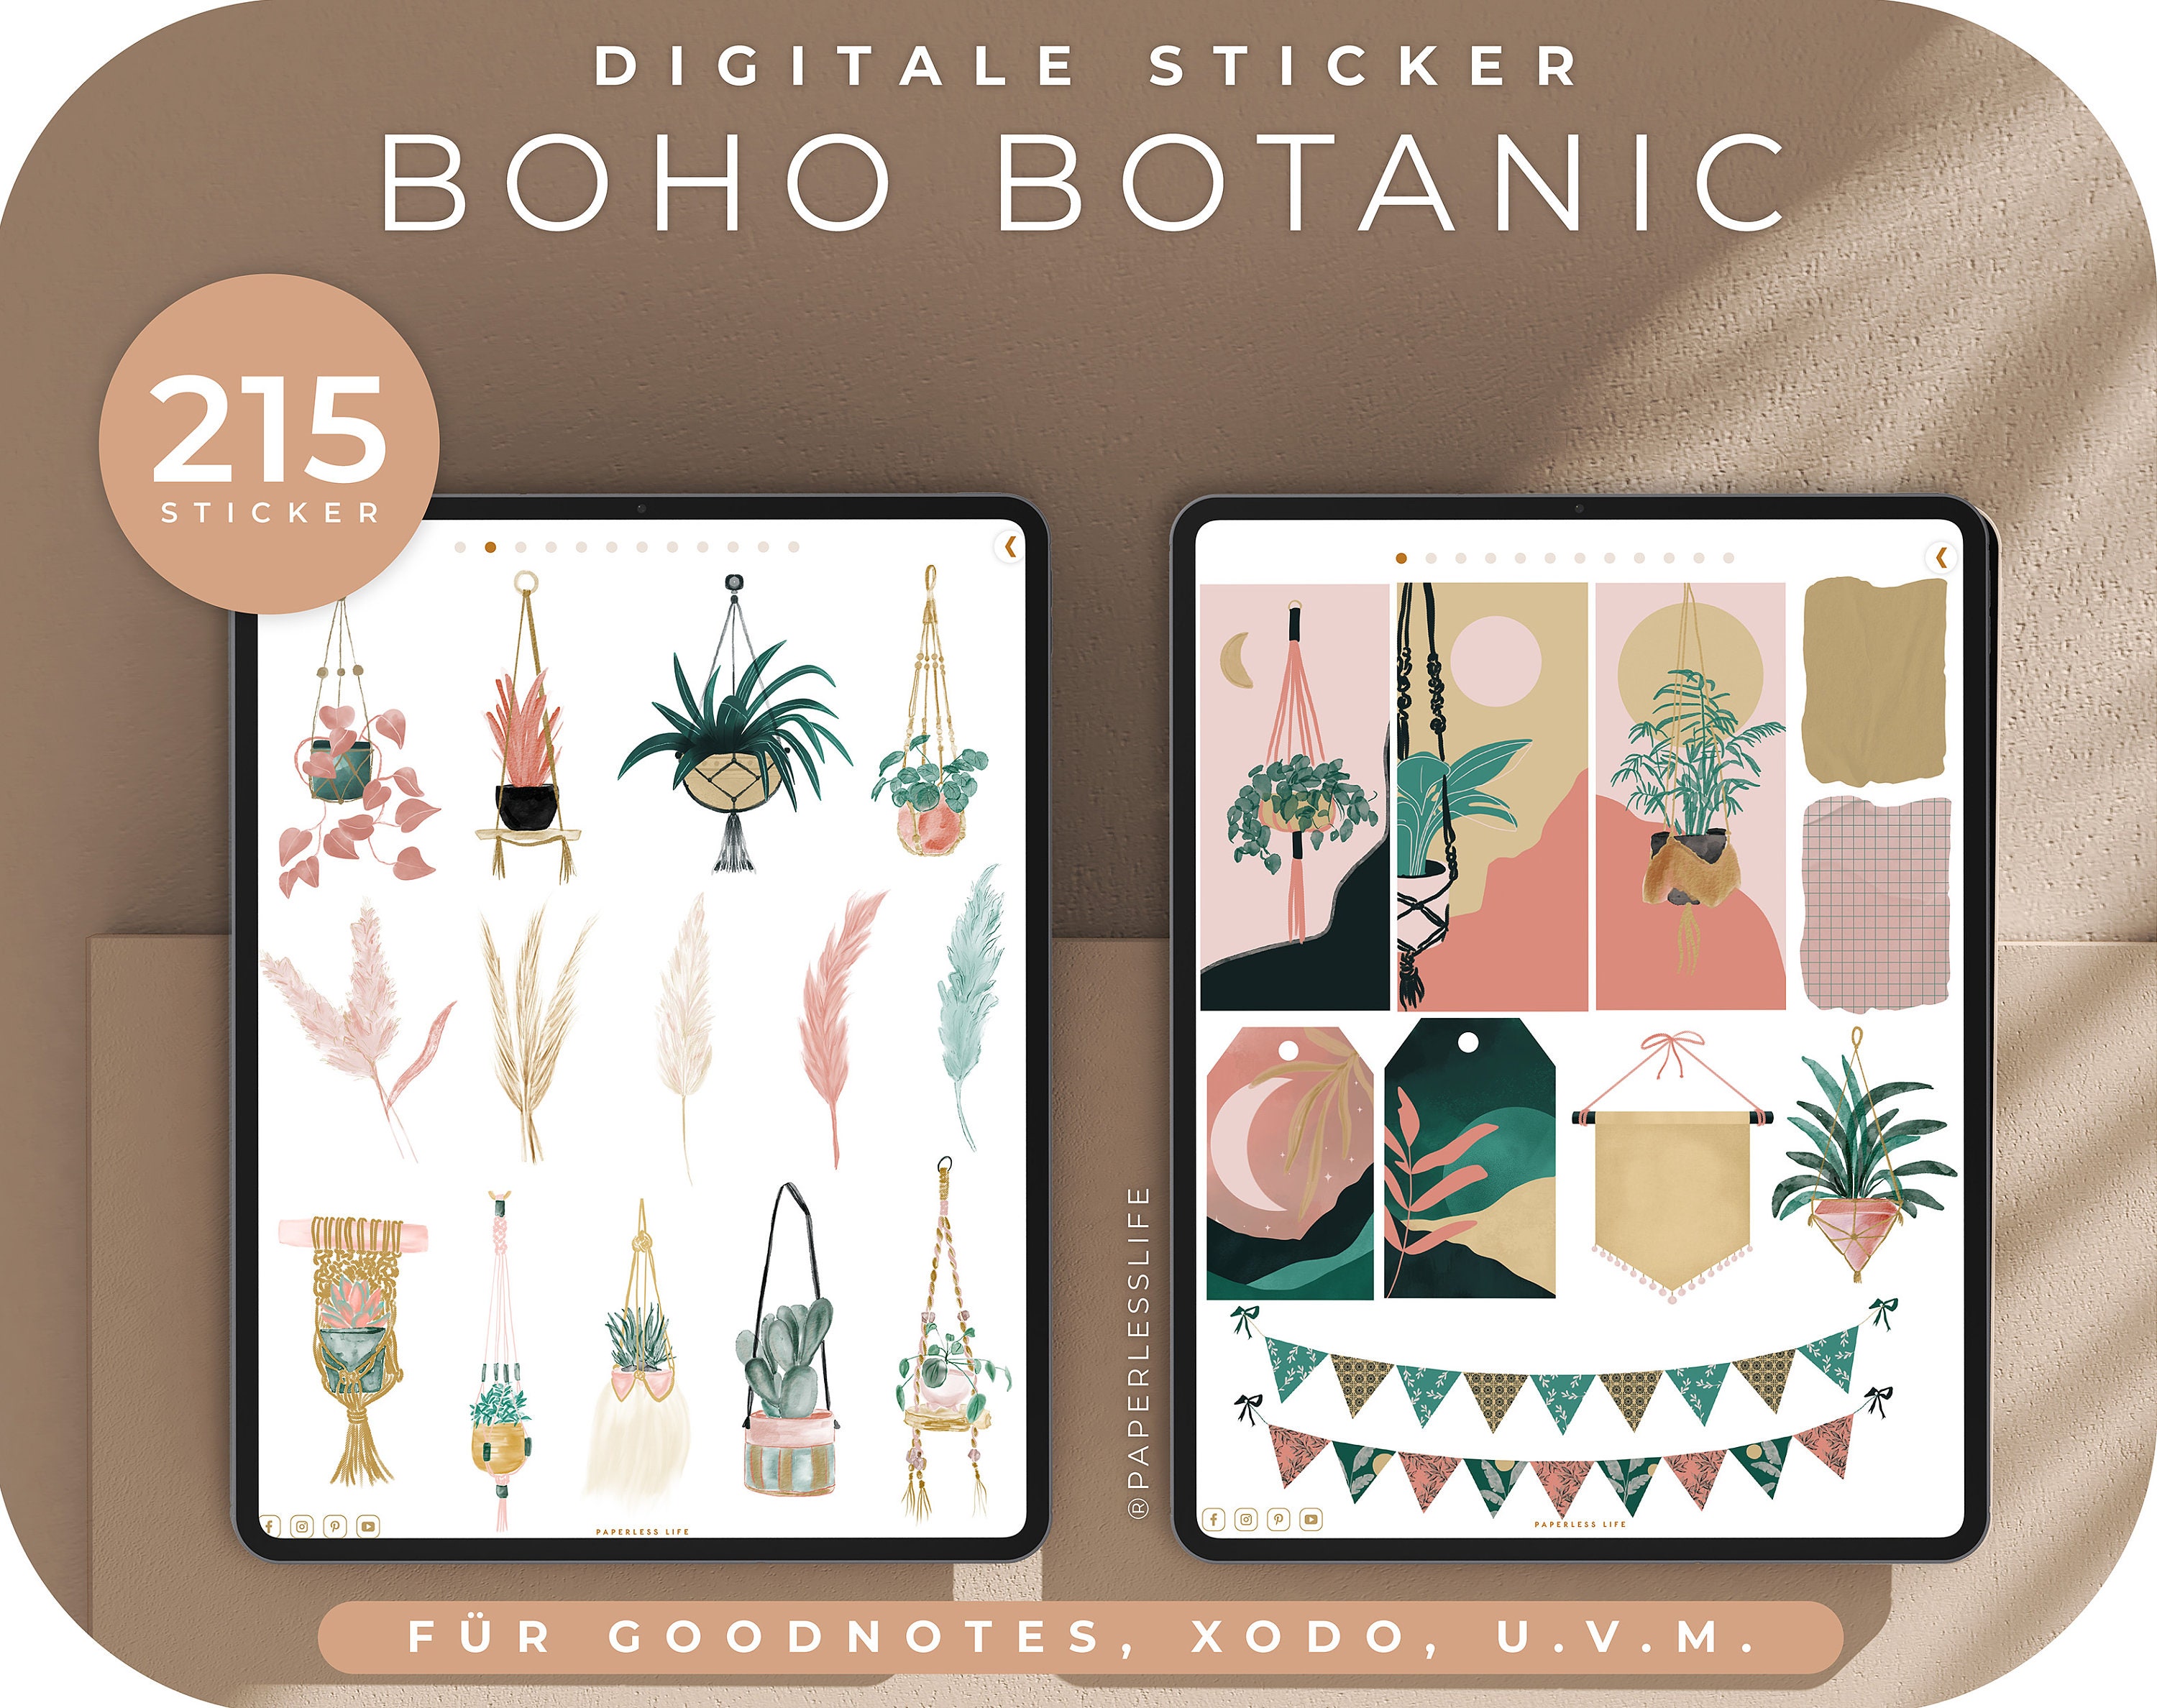 30 boho style botanic stickers for GoodNotes - AshiKArt's Ko-fi Shop -  Ko-fi ❤️ Where creators get support from fans through donations,  memberships, shop sales and more! The original 'Buy Me a